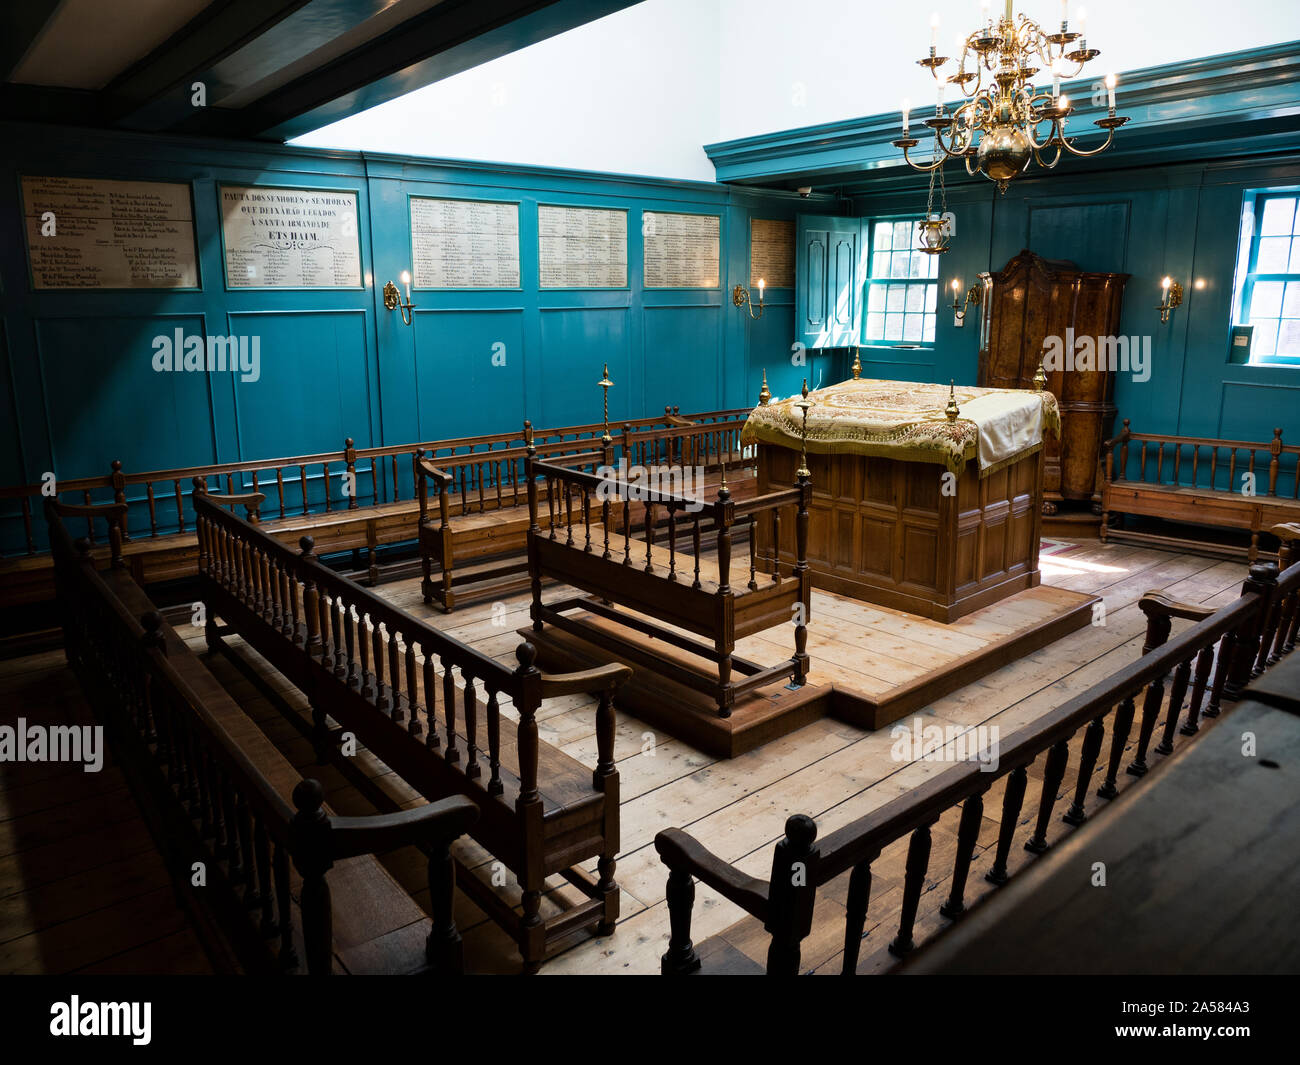 Interior of Portuguese Synagogue, Amsterdam, North Holland, Netherlands Stock Photo